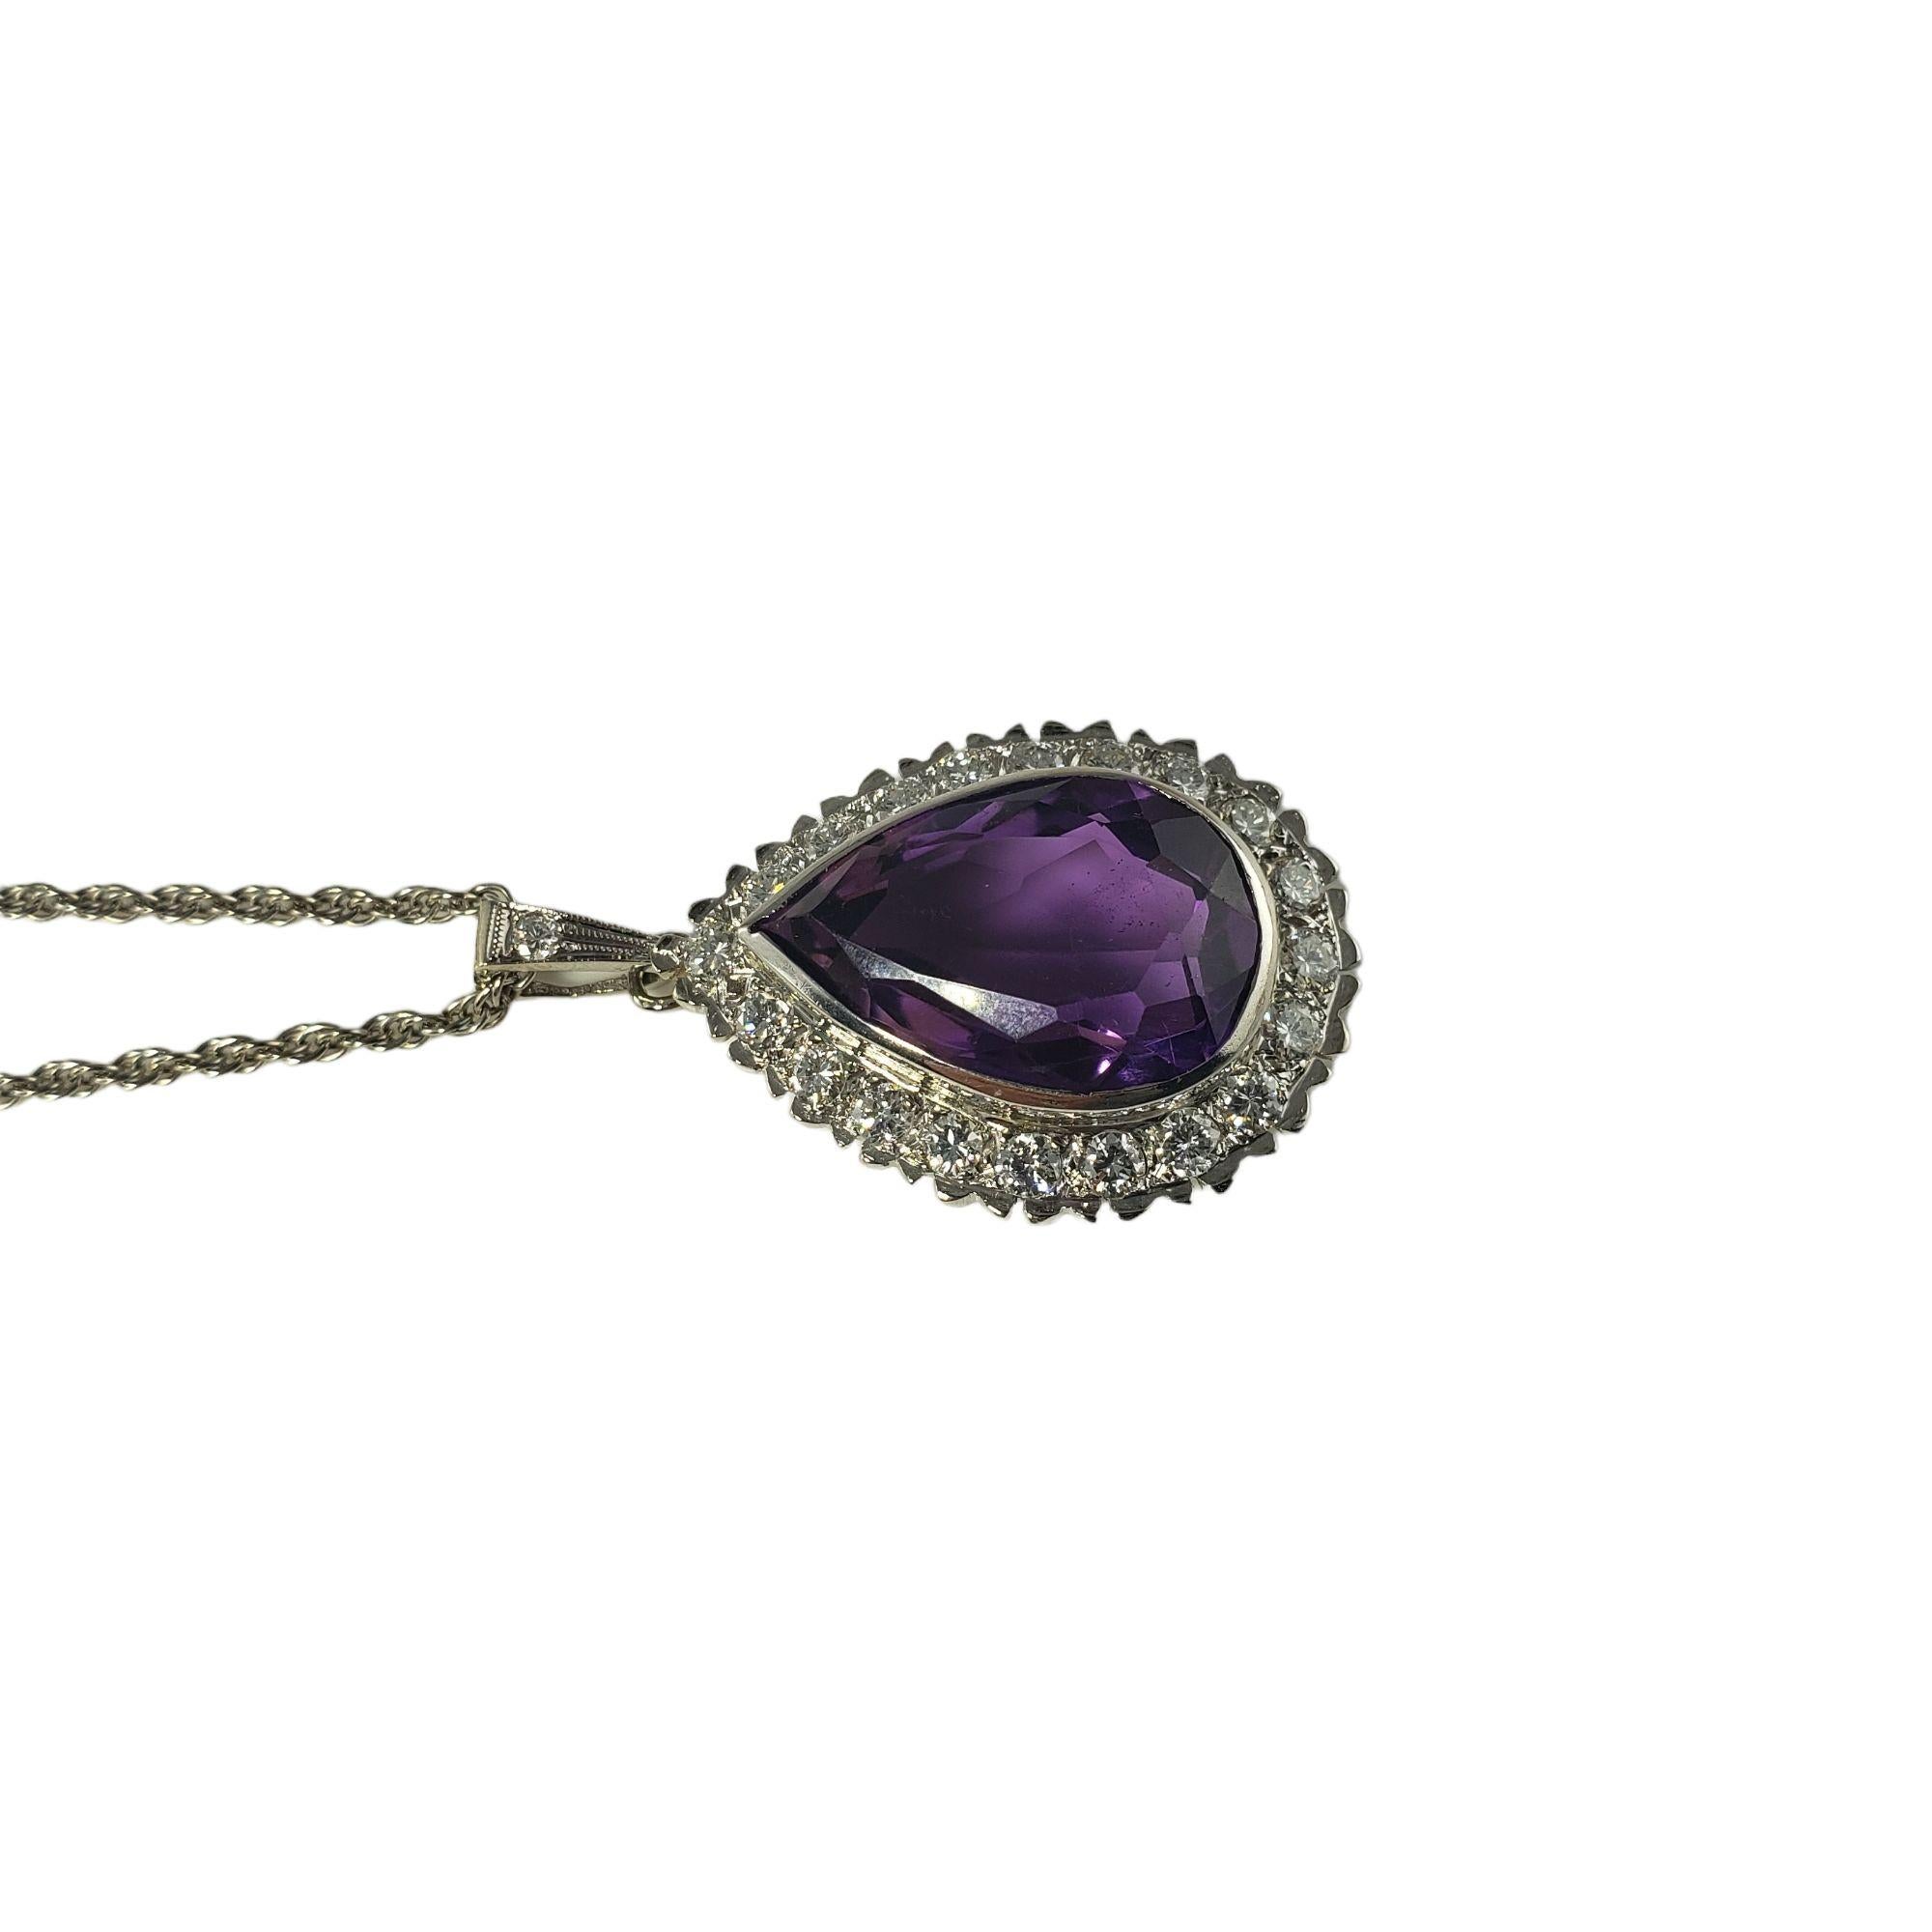 Vintage 14 Karat White Gold Amethyst and Diamond Pendant Necklace JAGi Certified-

This stunning pendant necklace features one pear-shaped amethyst (20 mm x 14 mm) and 21 round brilliant cut diamonds set in classic 14K white gold.

Amethyst weight: